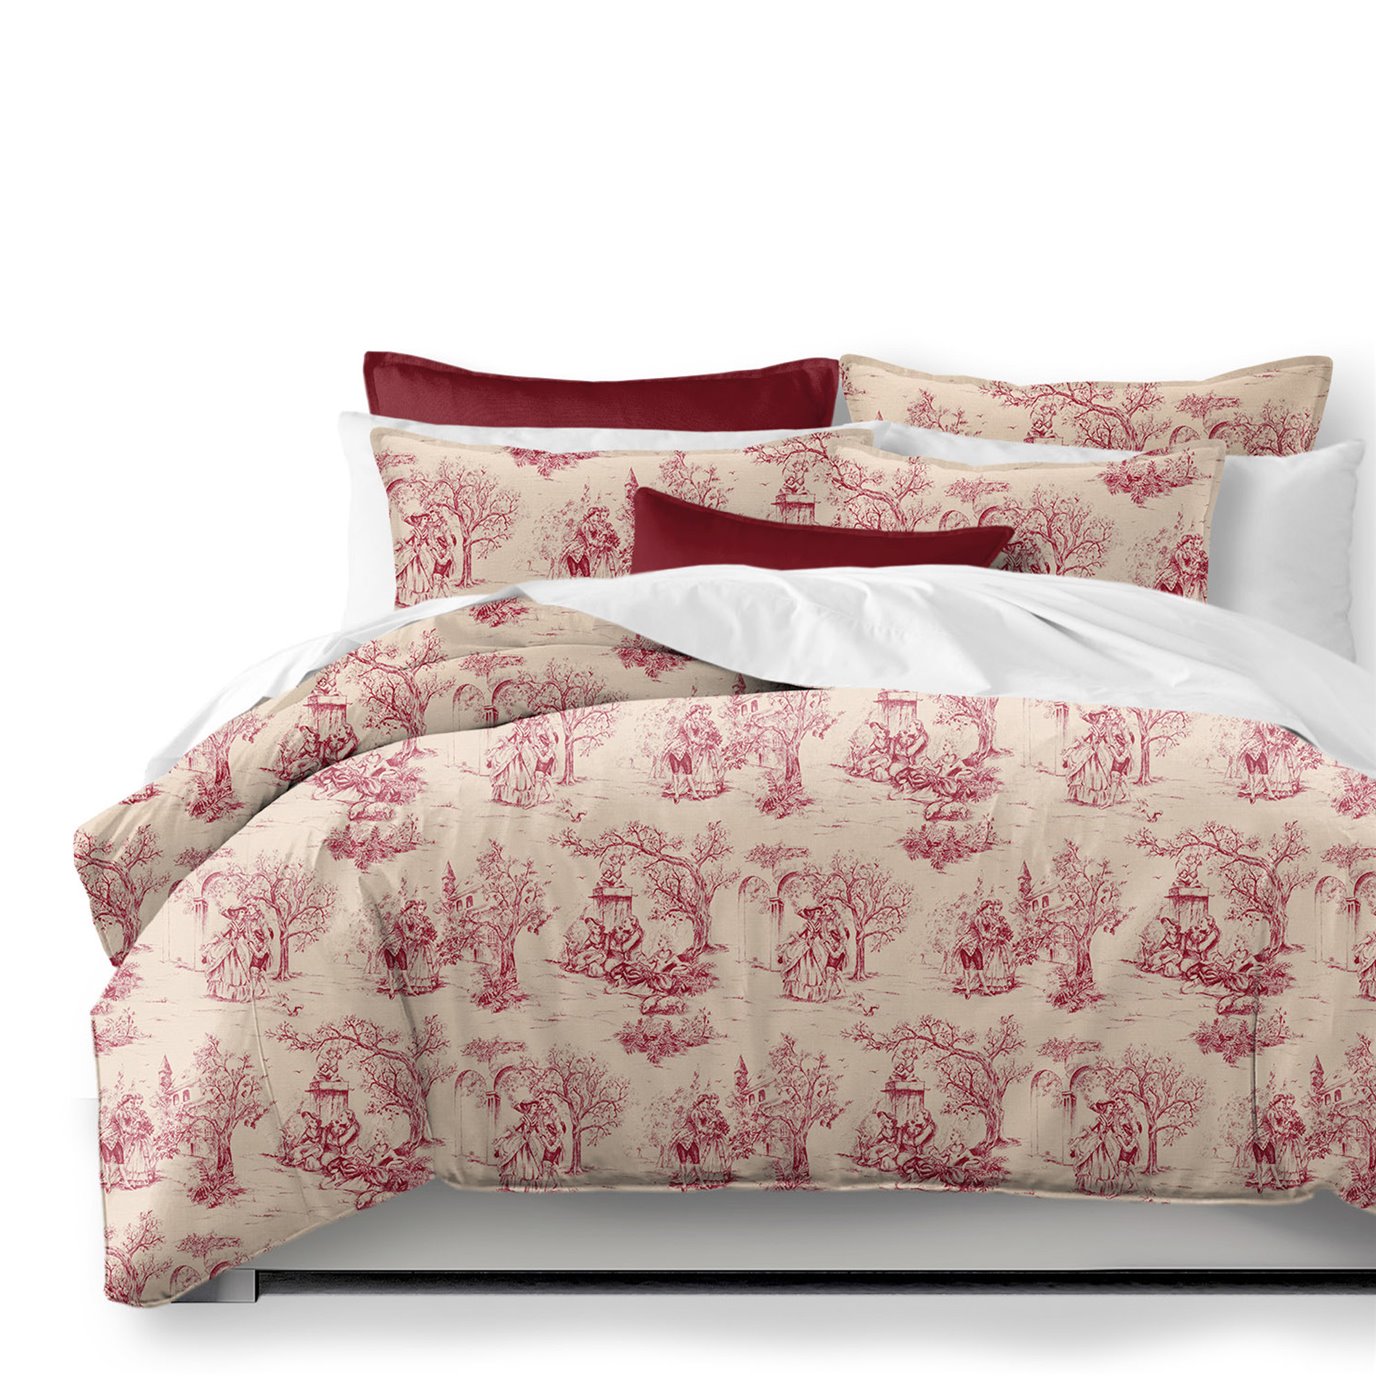 Archamps Toile Red Coverlet and Pillow Sham(s) Set - Size Twin